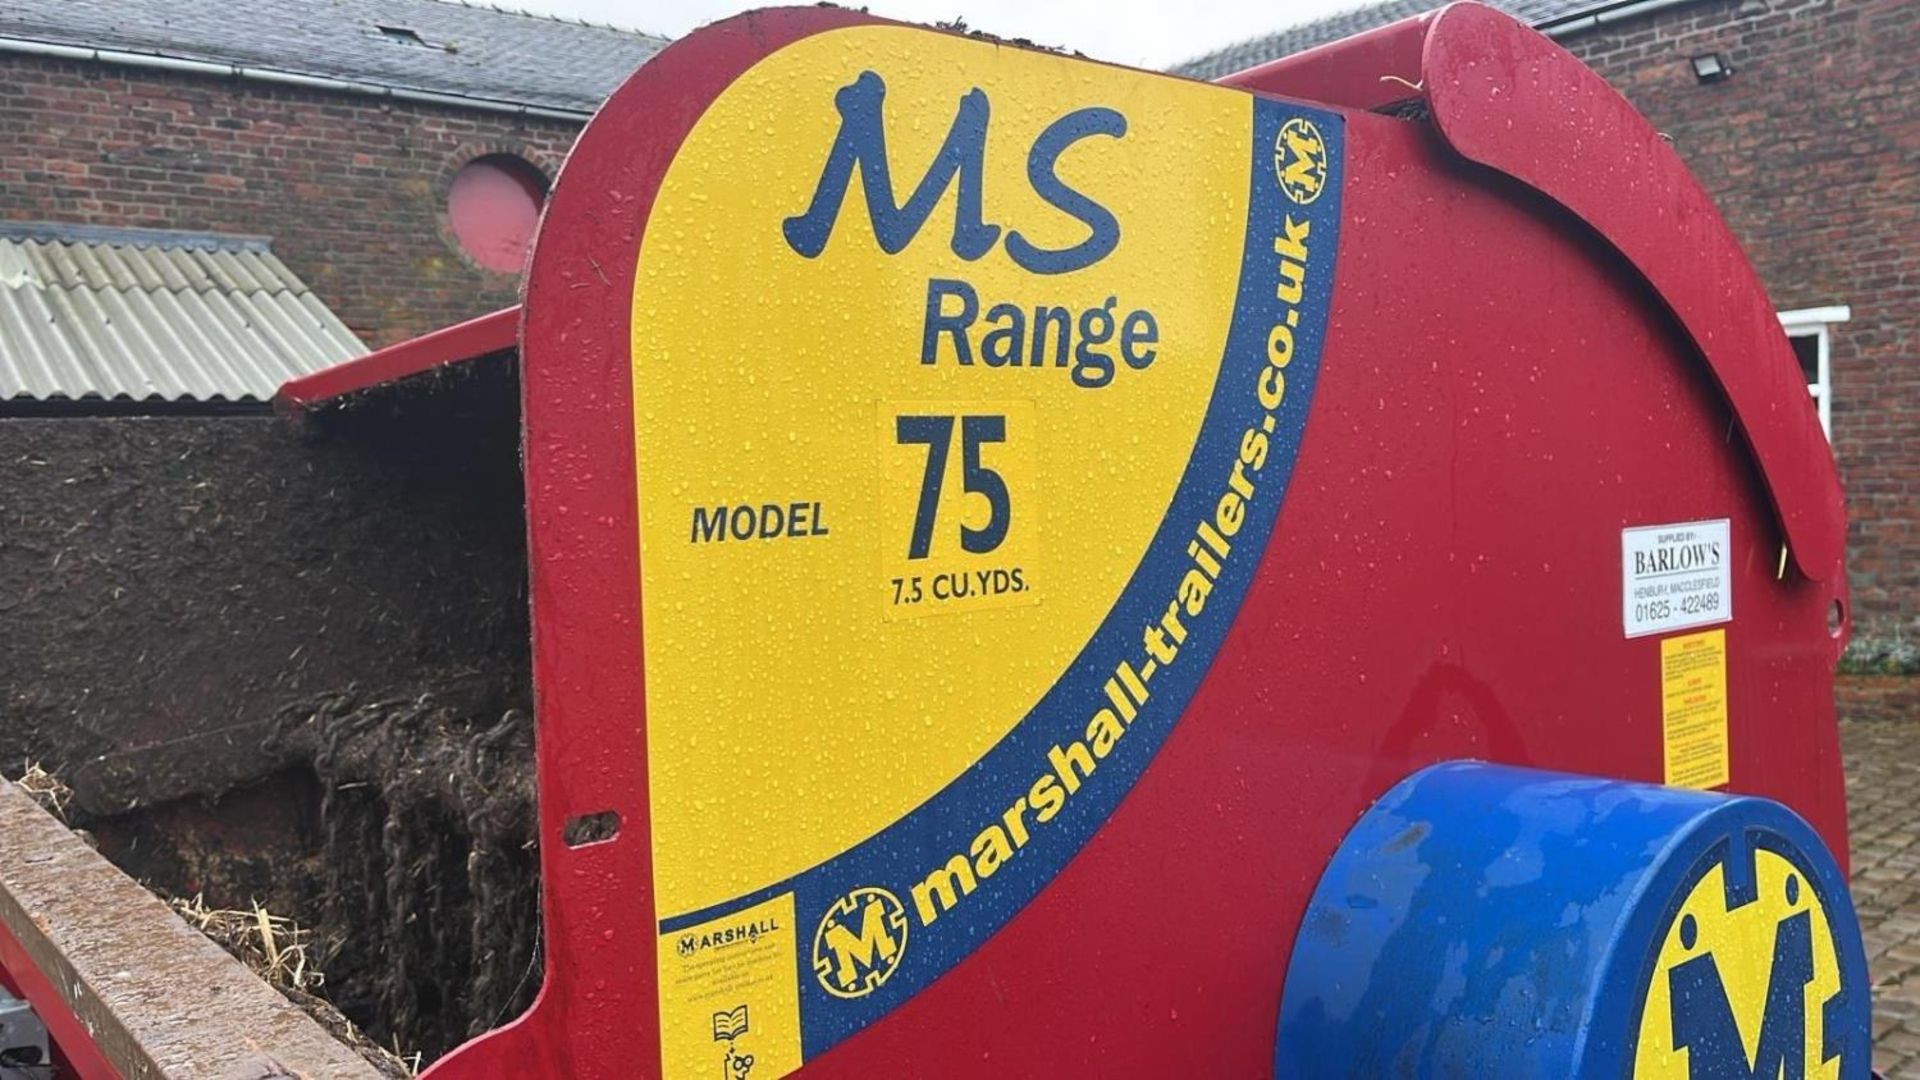 2016 MARSHALL MS 75 ROTARY MANURE SPREADER 7.5 CUBIC YARDS CARRYING CAPACITY 5 TONNE SERIAL NUMBER - Image 13 of 13